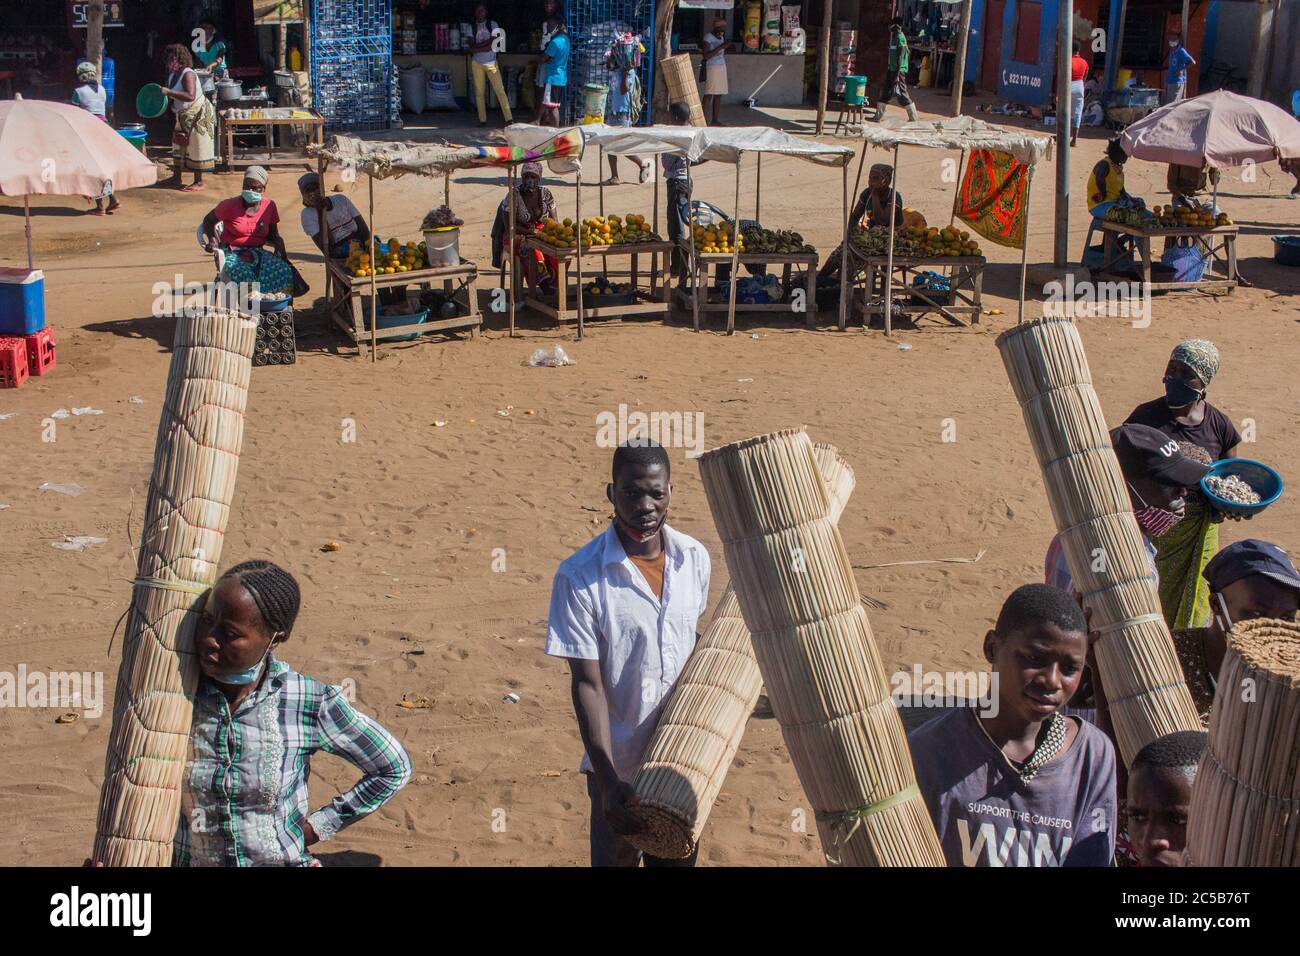 Street vendors selling handmade woven mats in the market in Inhambane Province, Mozambique Stock Photo